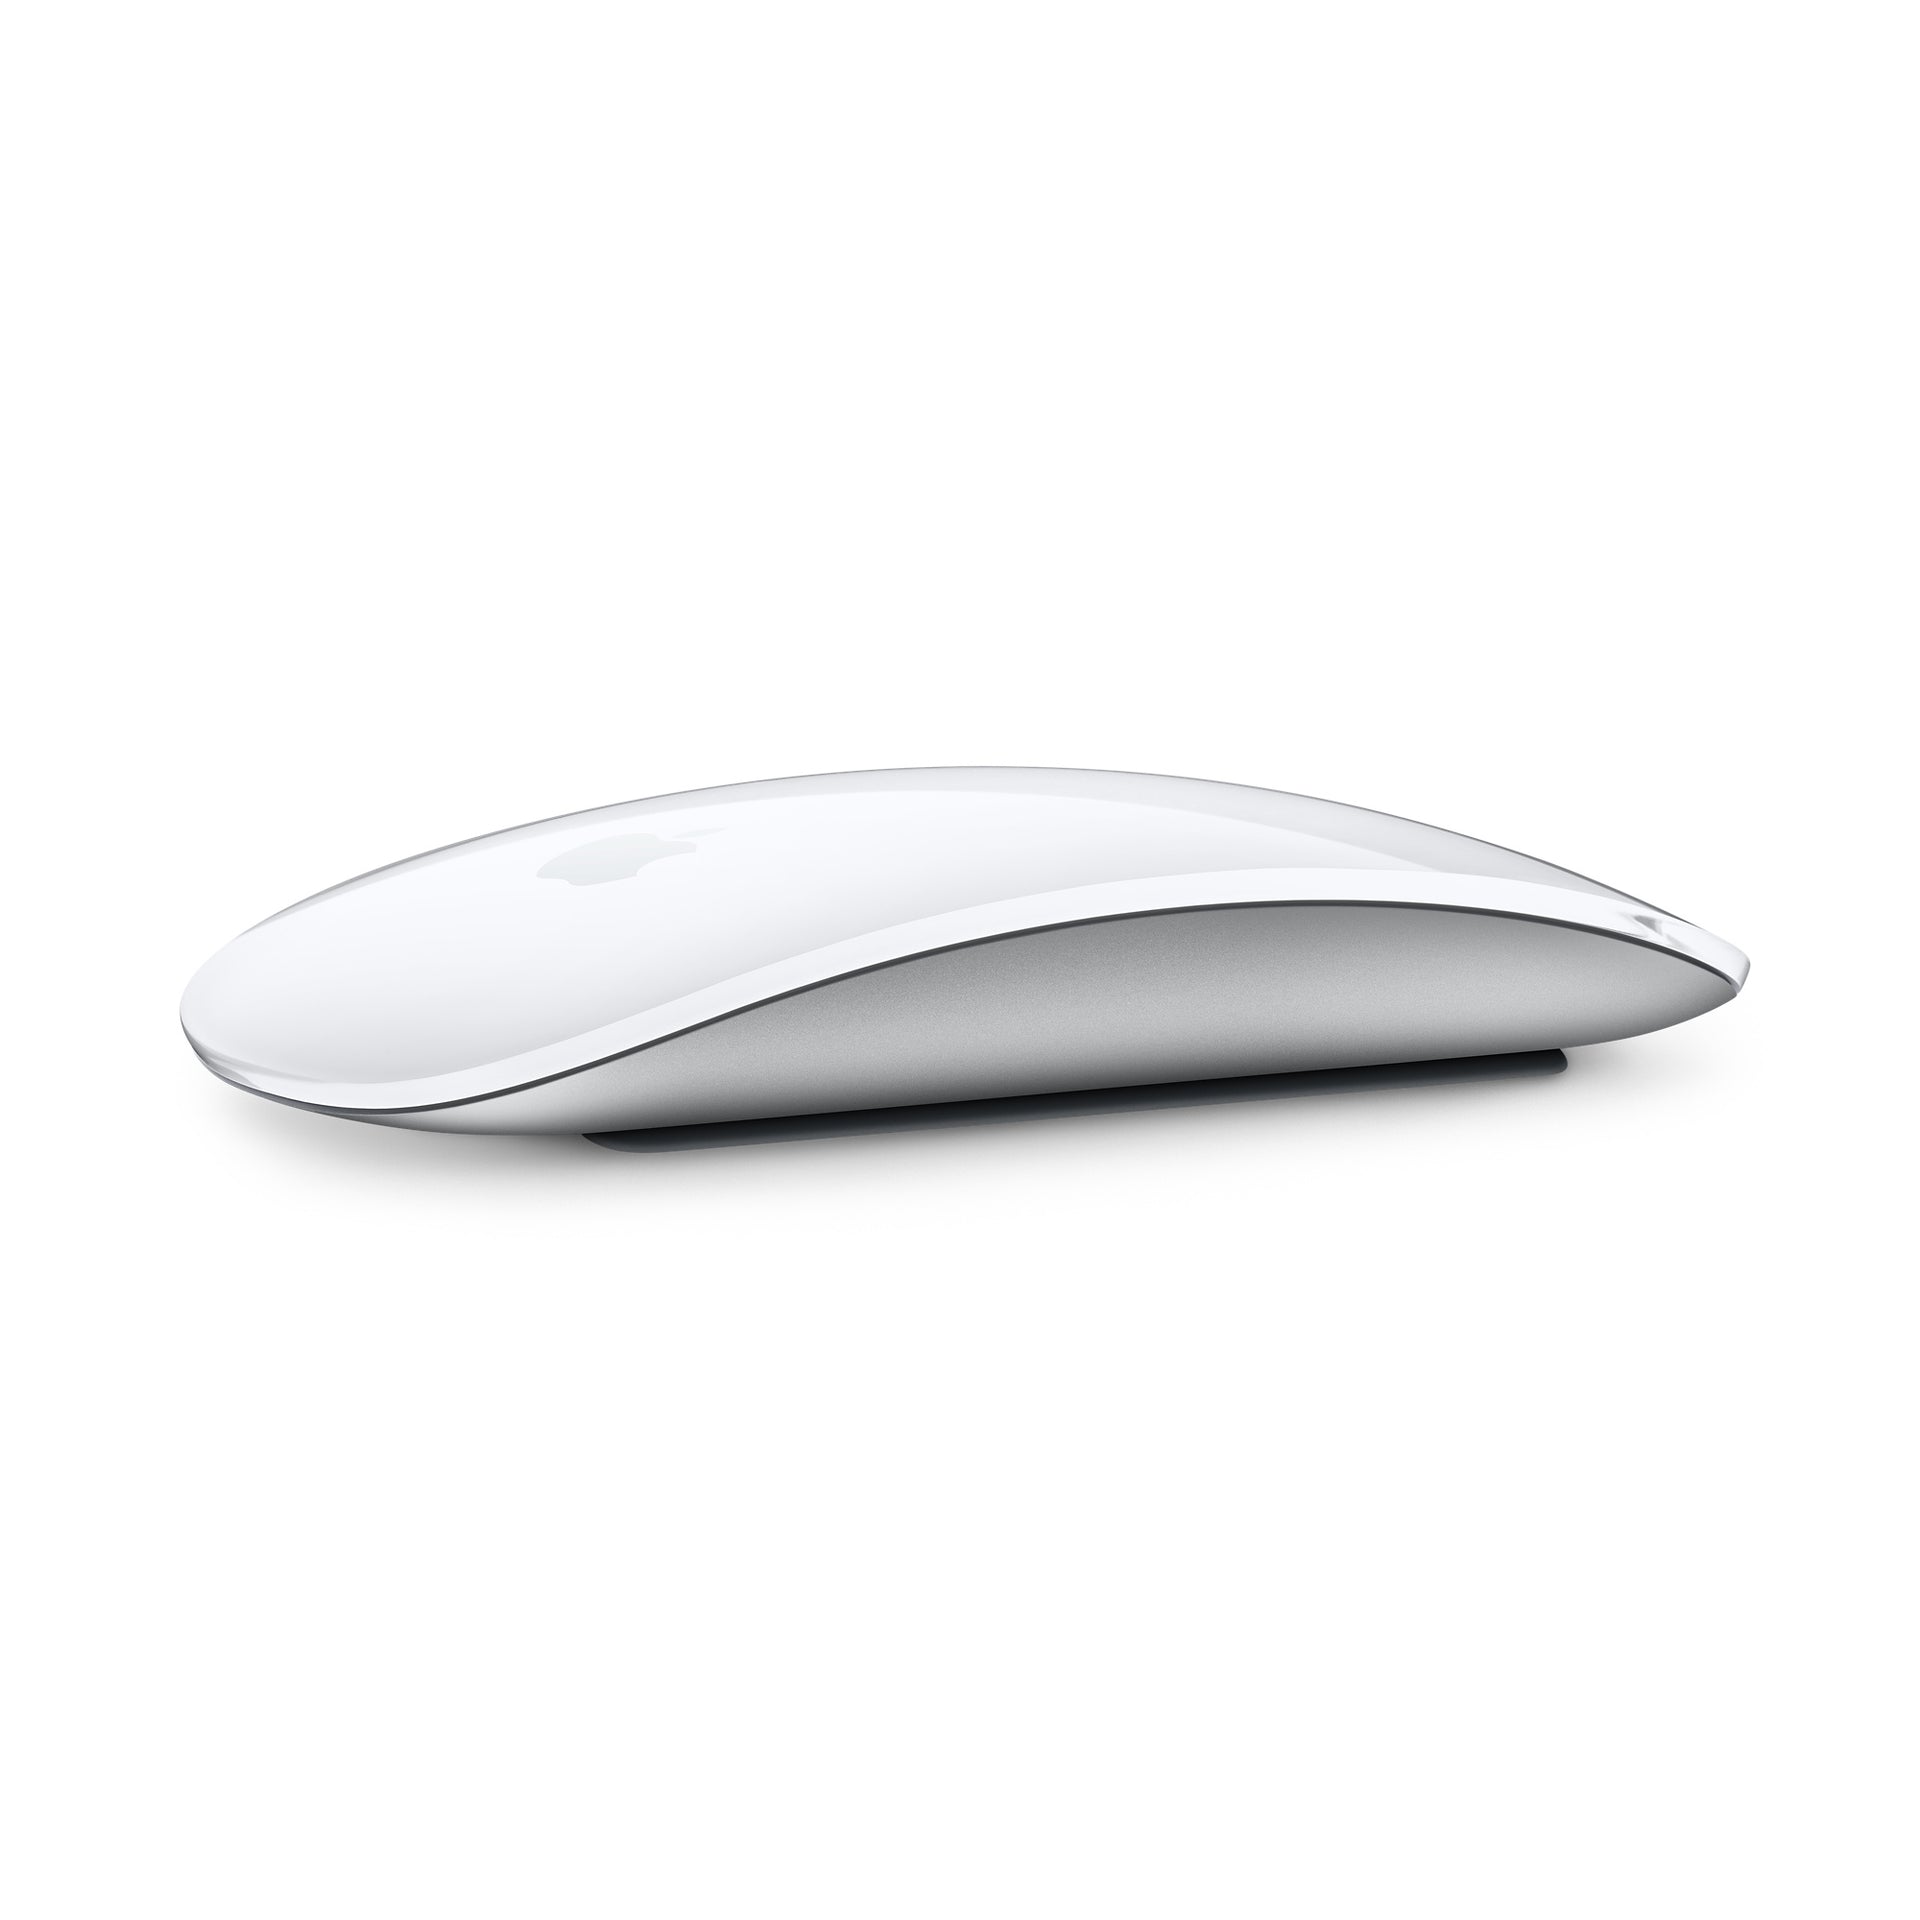 Pre Owned Magic Mouse - White Multi-Touch Surface